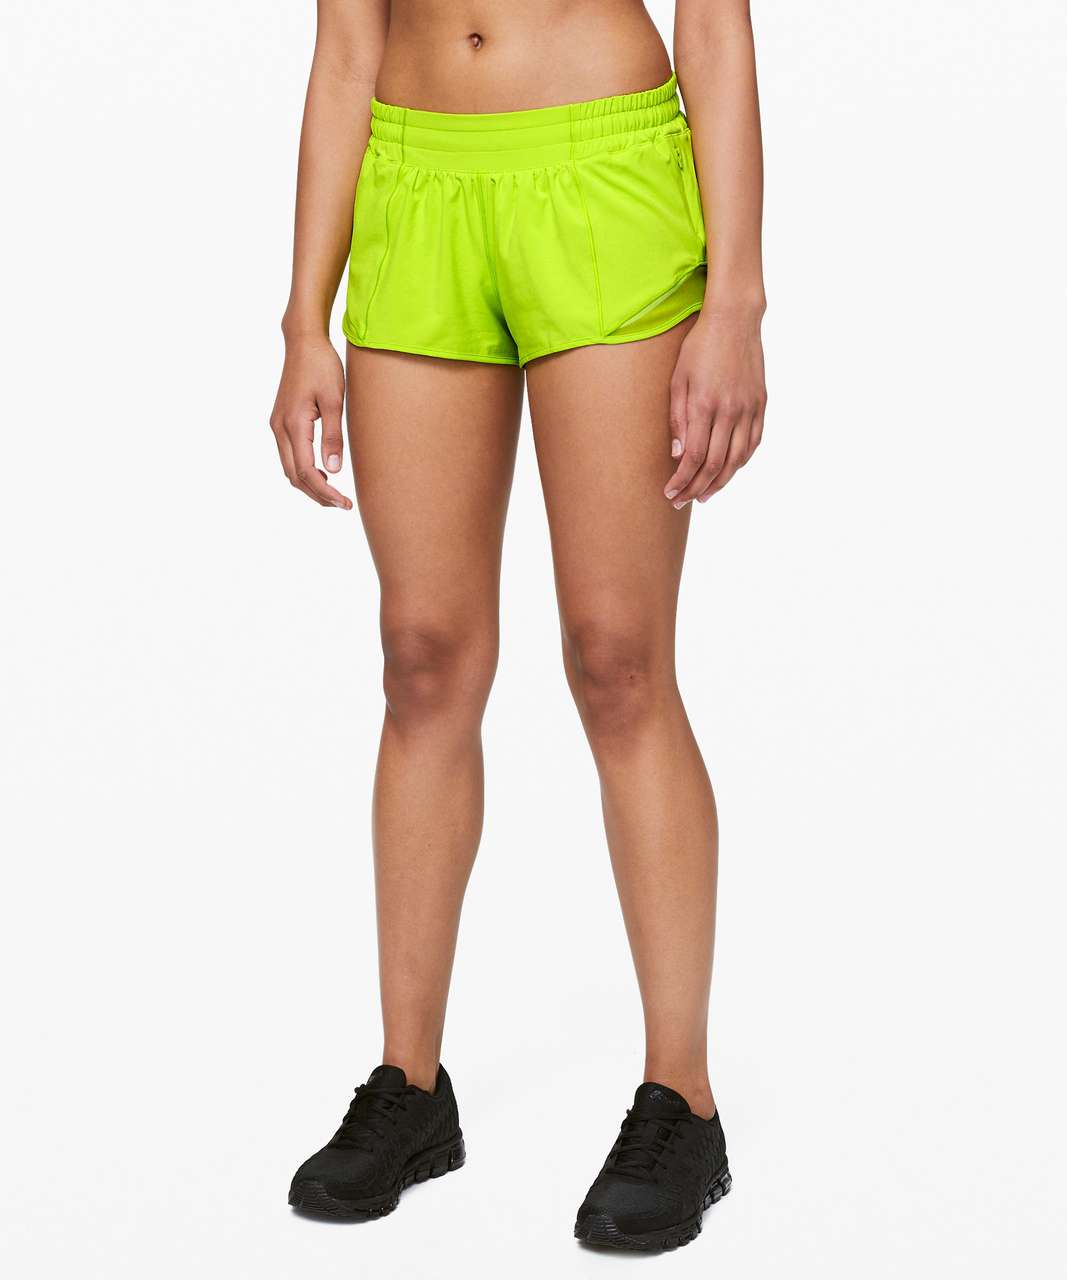 lululemon price increase? my favorite shorts, the hotty hot HR 2.5” shorts  are typically $58 and some colors are that price but some are $68 : r/ lululemon